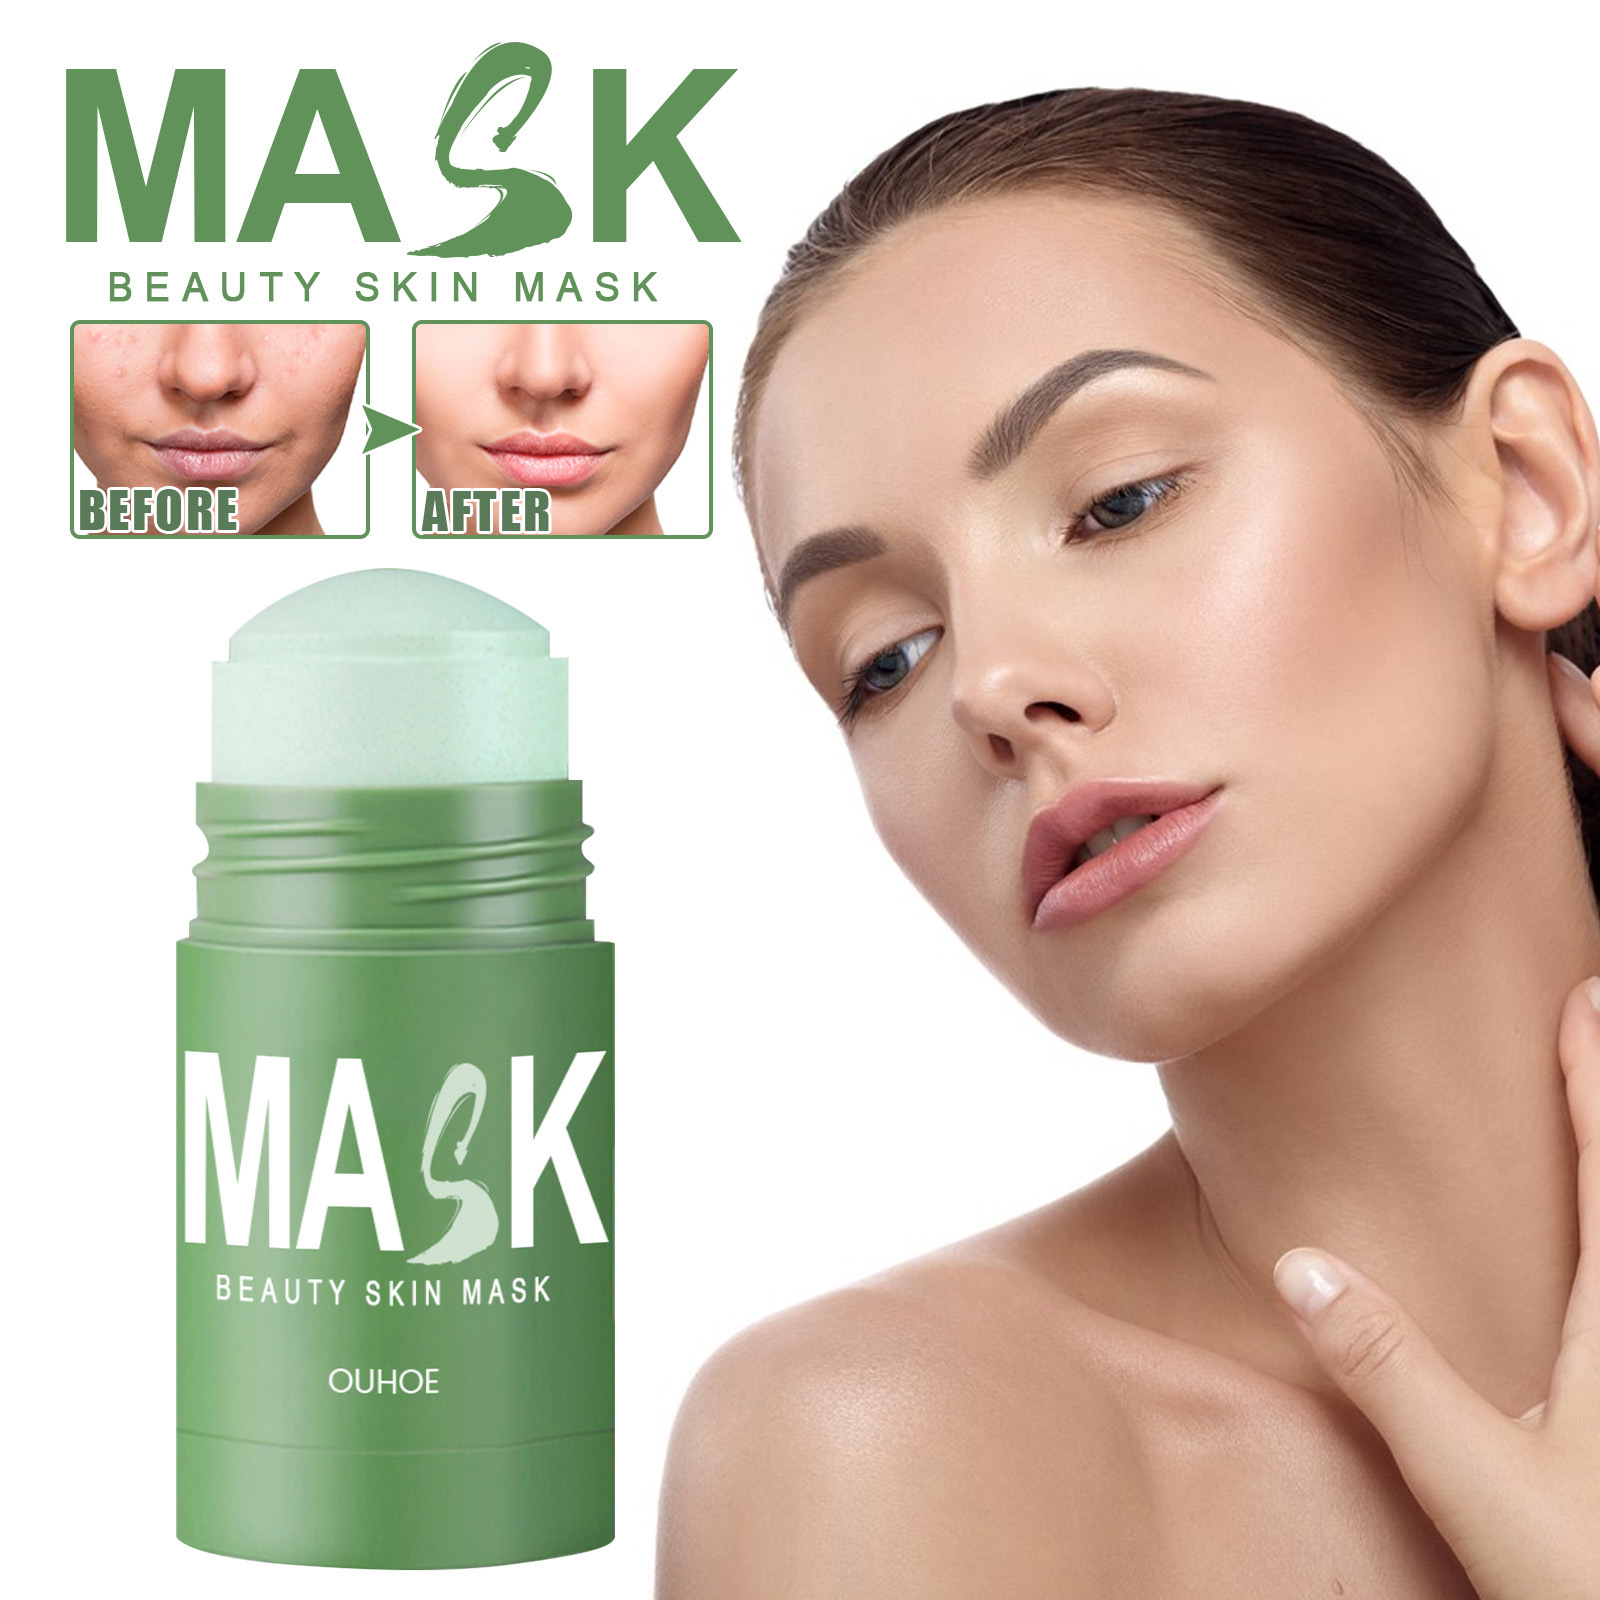 Ouhoe Green Tea Mask Stick Acne Blackhead Acne Facial Deep Cleansing Firming Pores Daub-Type Mud Mask